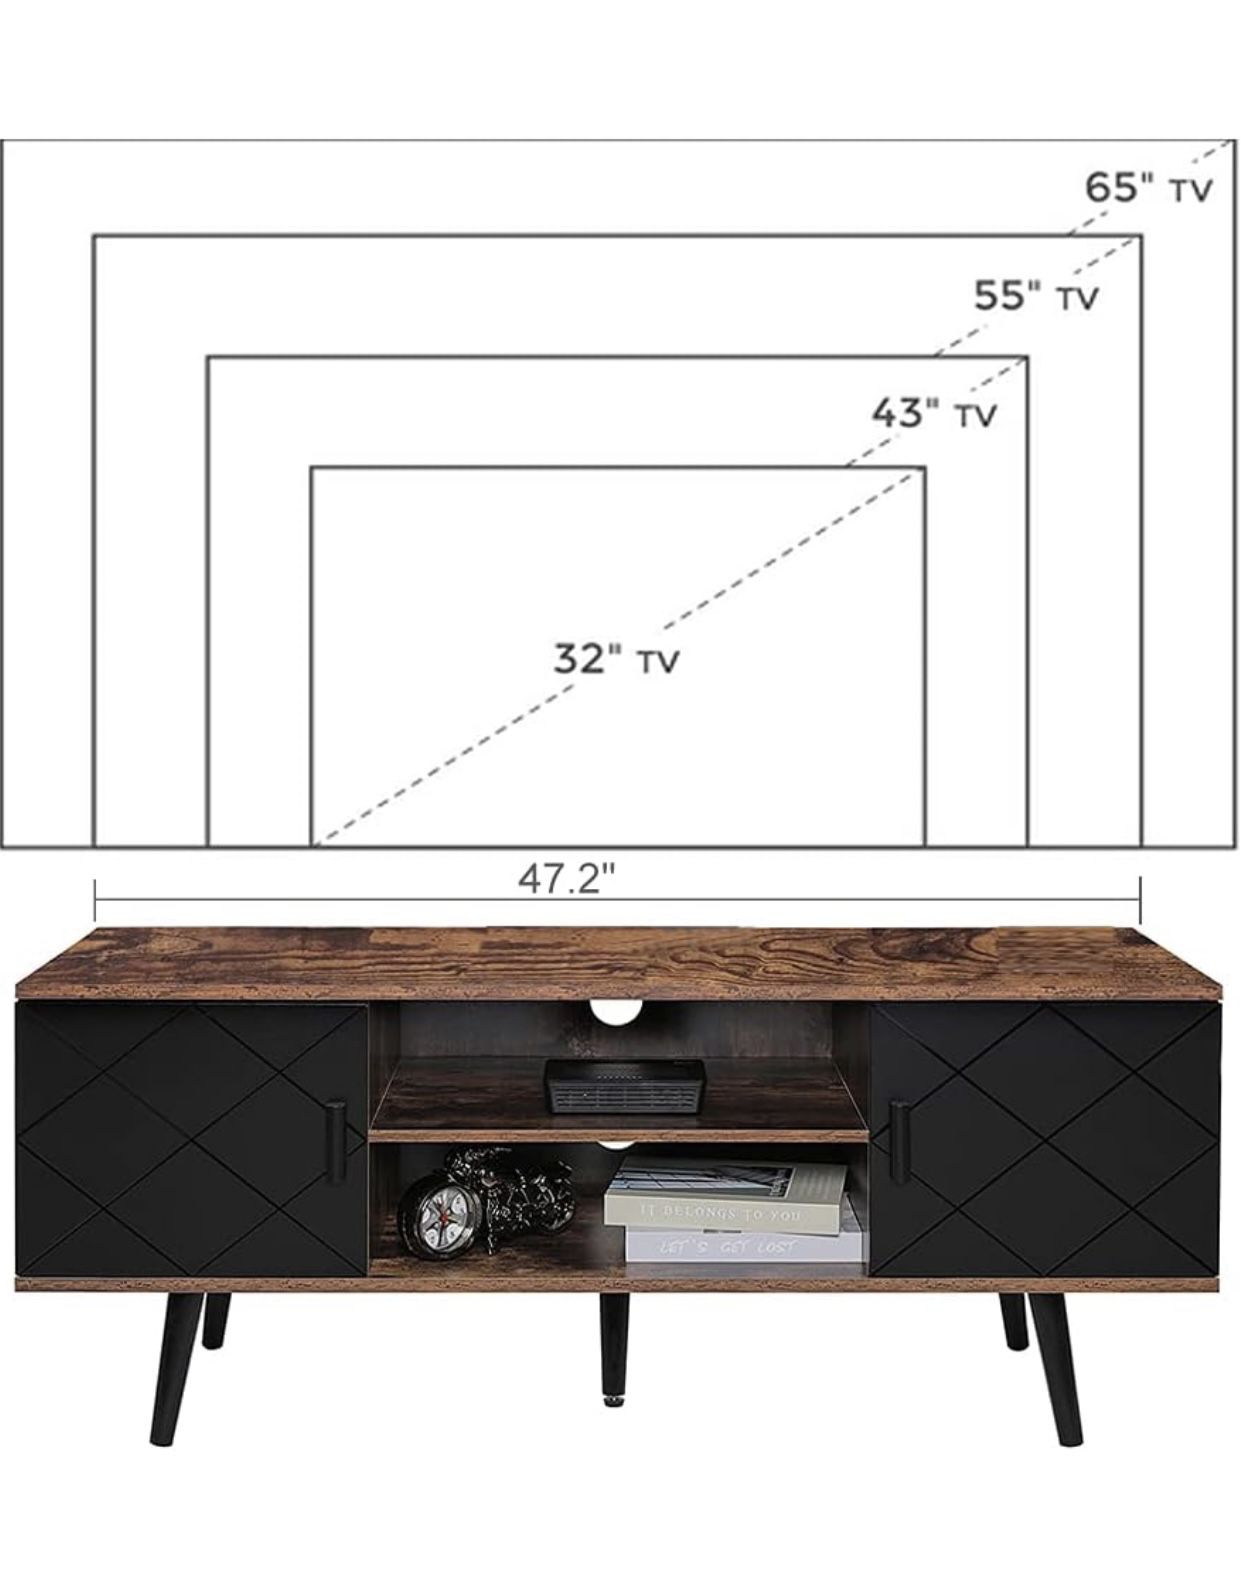 Iwell TV Stand for 55 inch TV, TV Console, Entertainment Center with 2 Cabinets & Open Shelf, Mid Century Modern TV Stand for Living Room/Bedroom, Bla